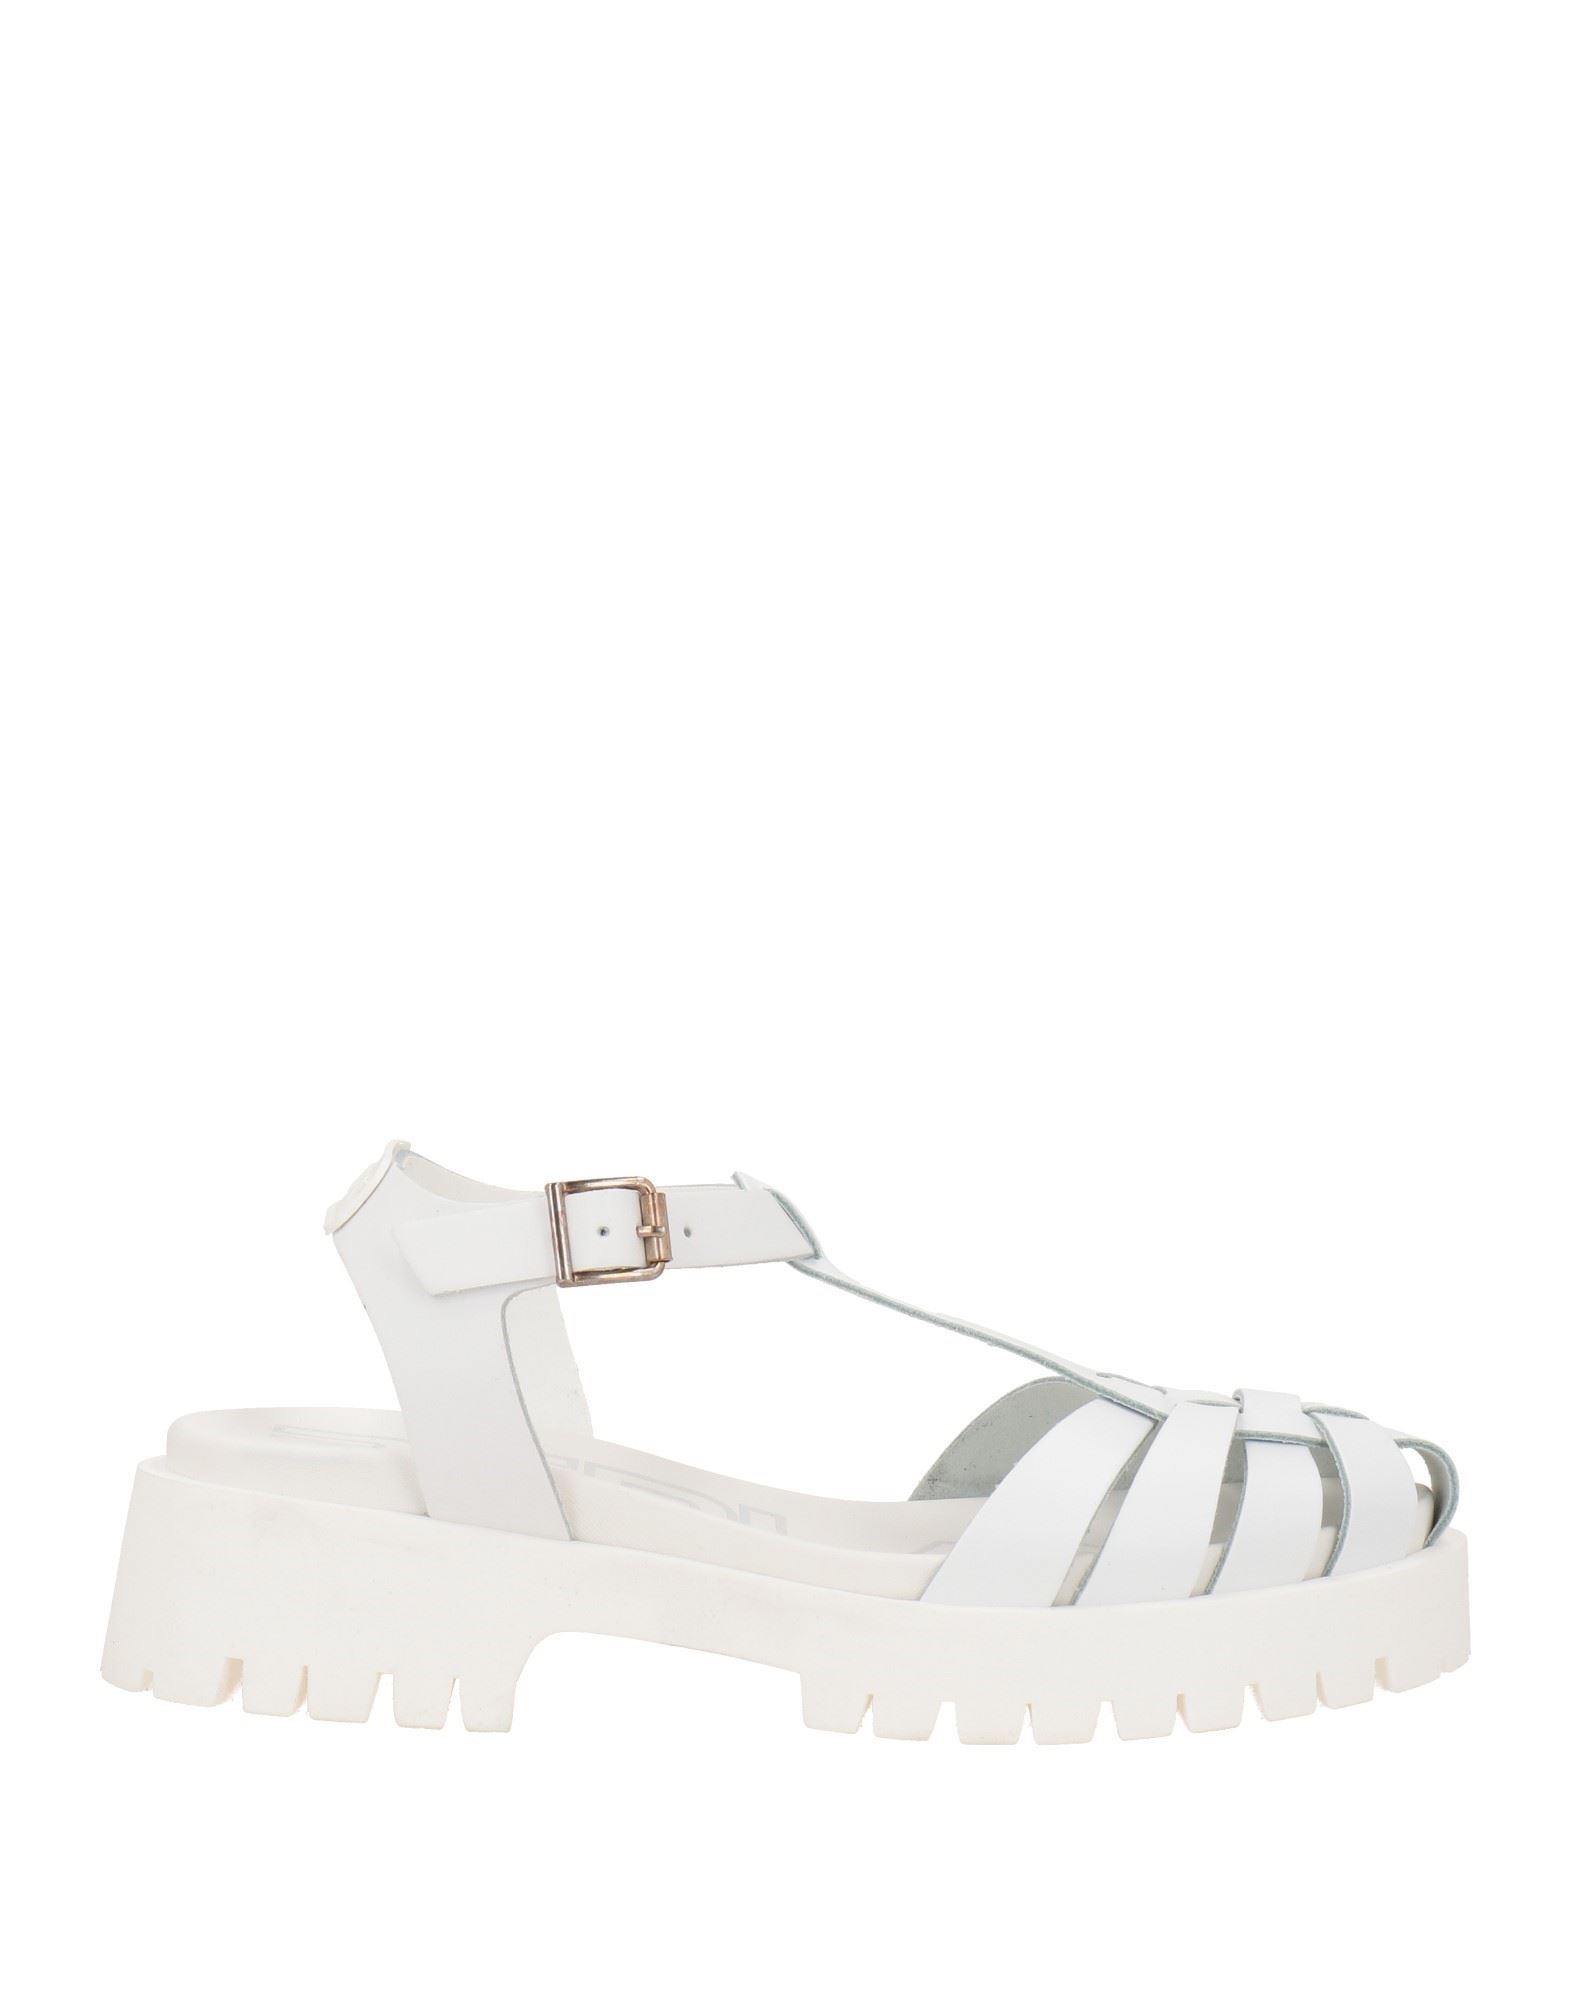 Replay Sandals In White